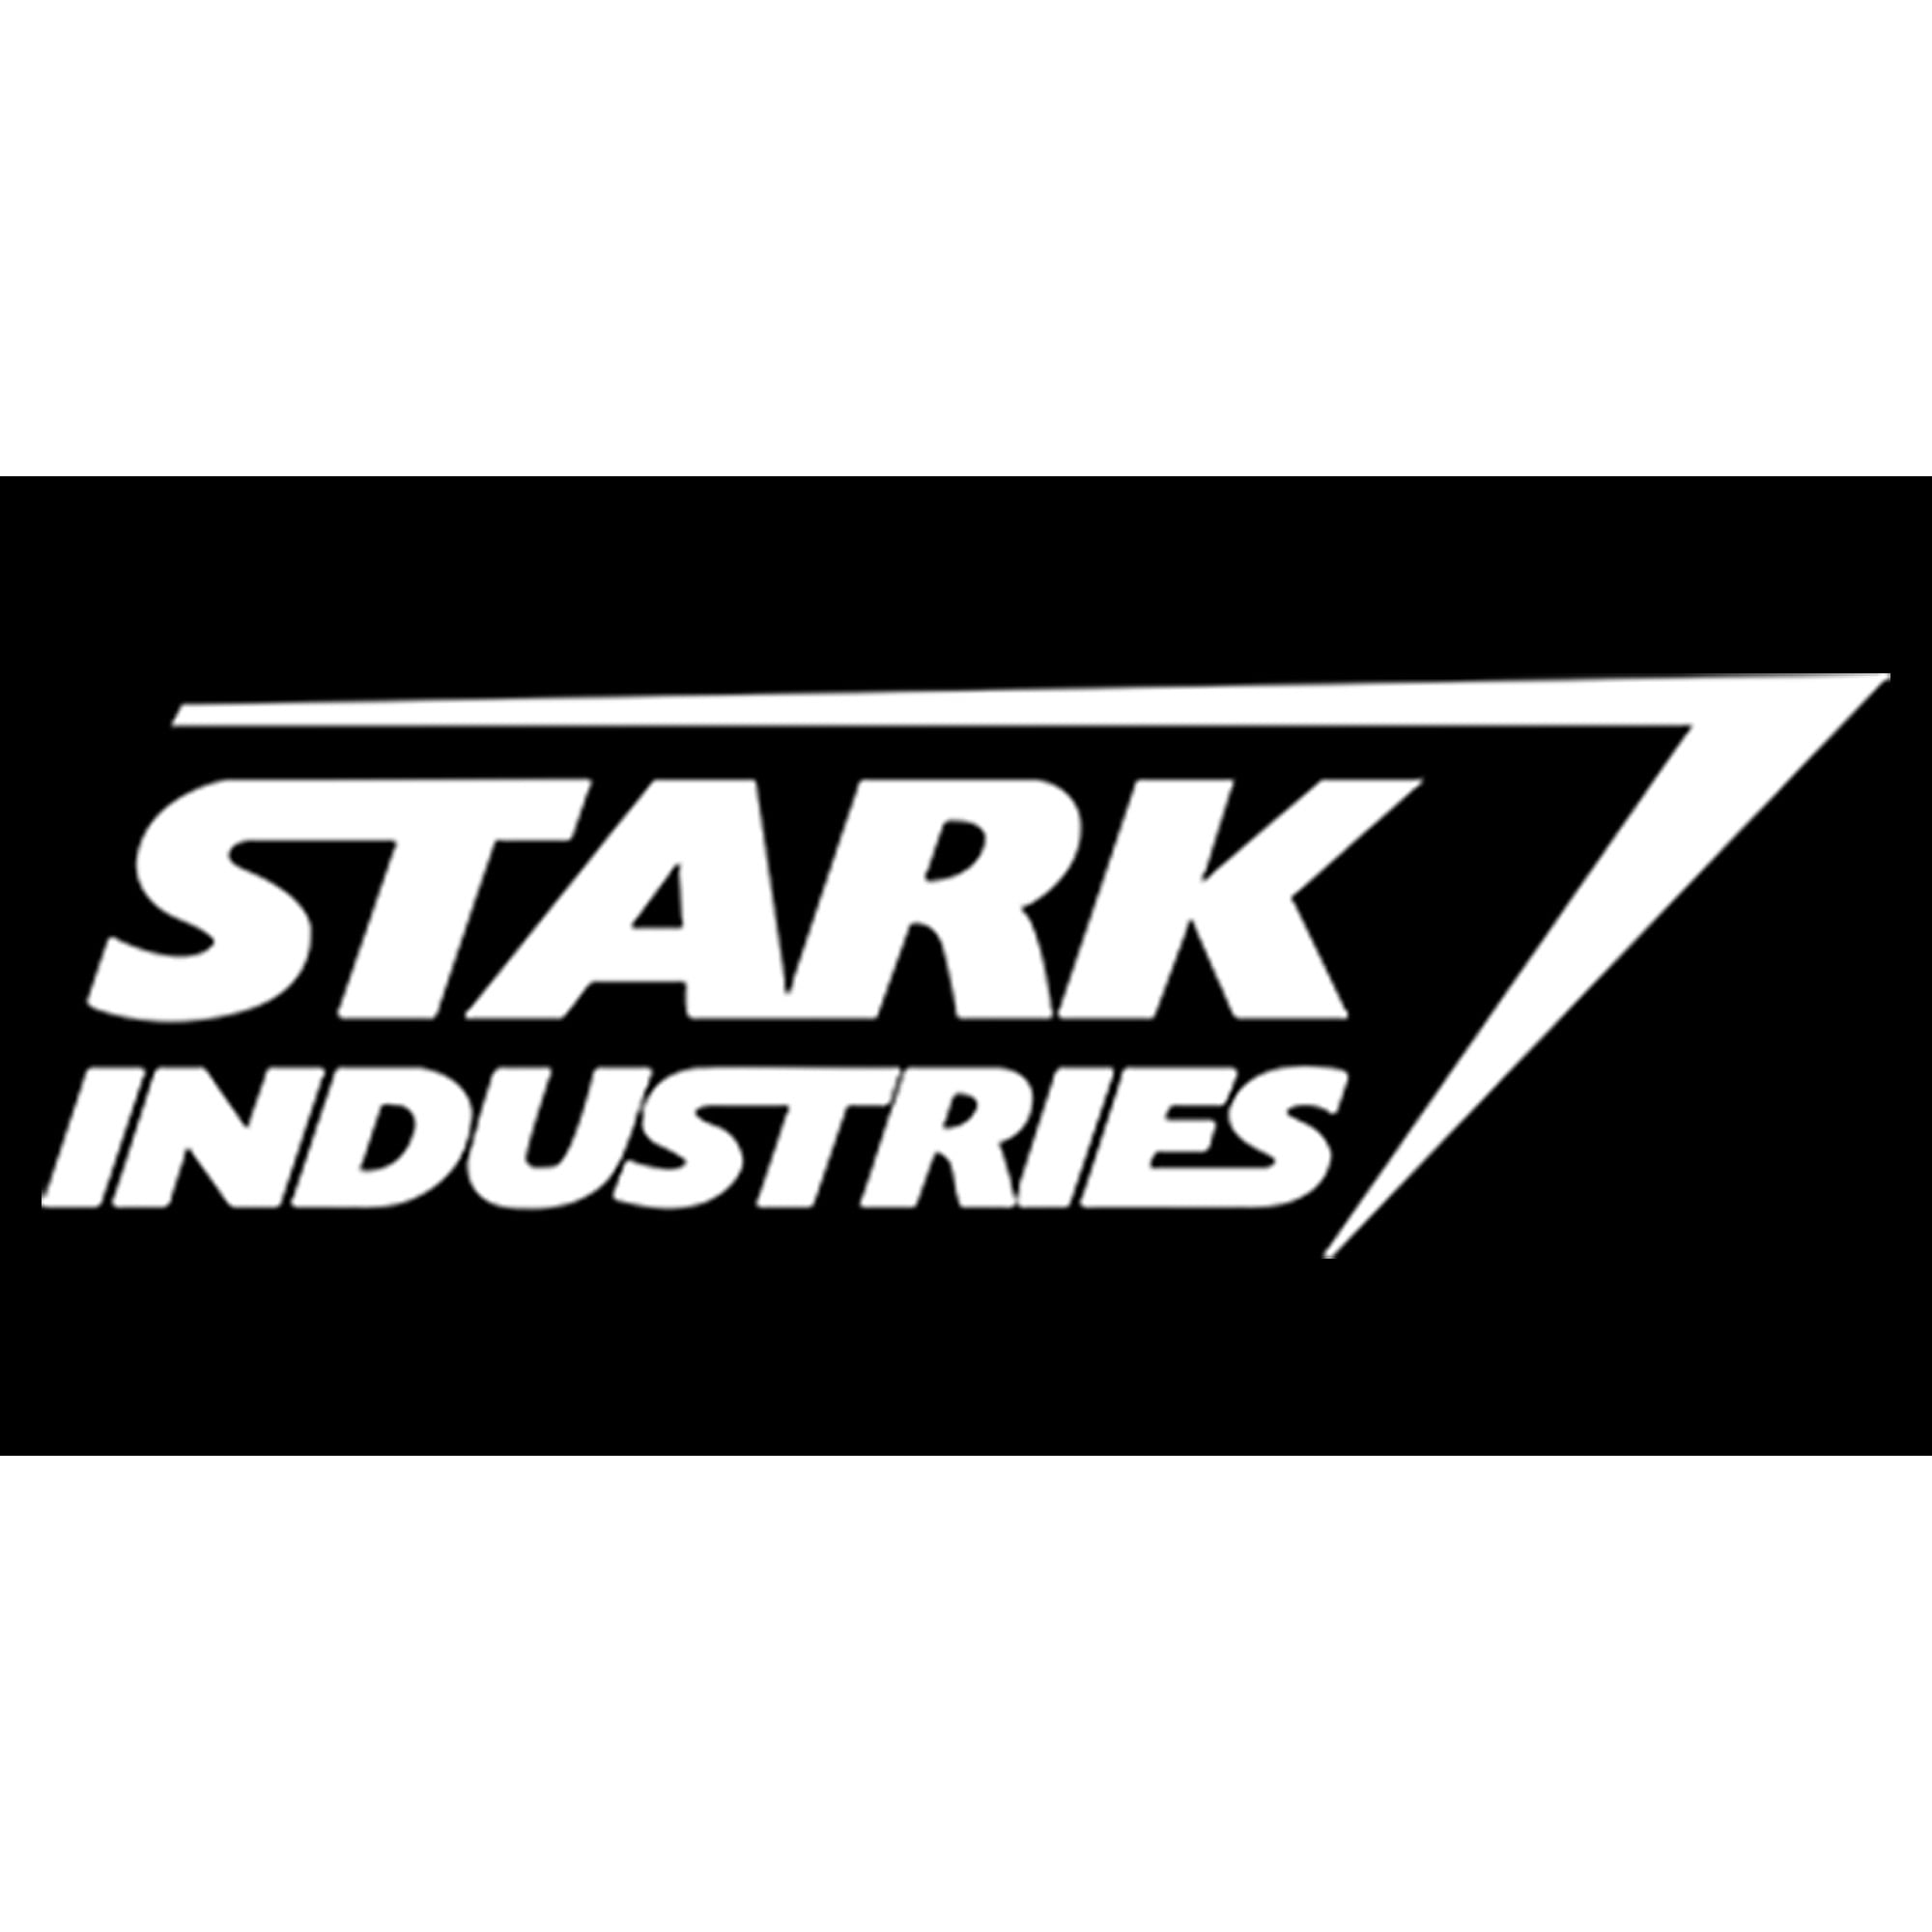 In Iron Man, the Stark Industries logo bears a strong resemblance